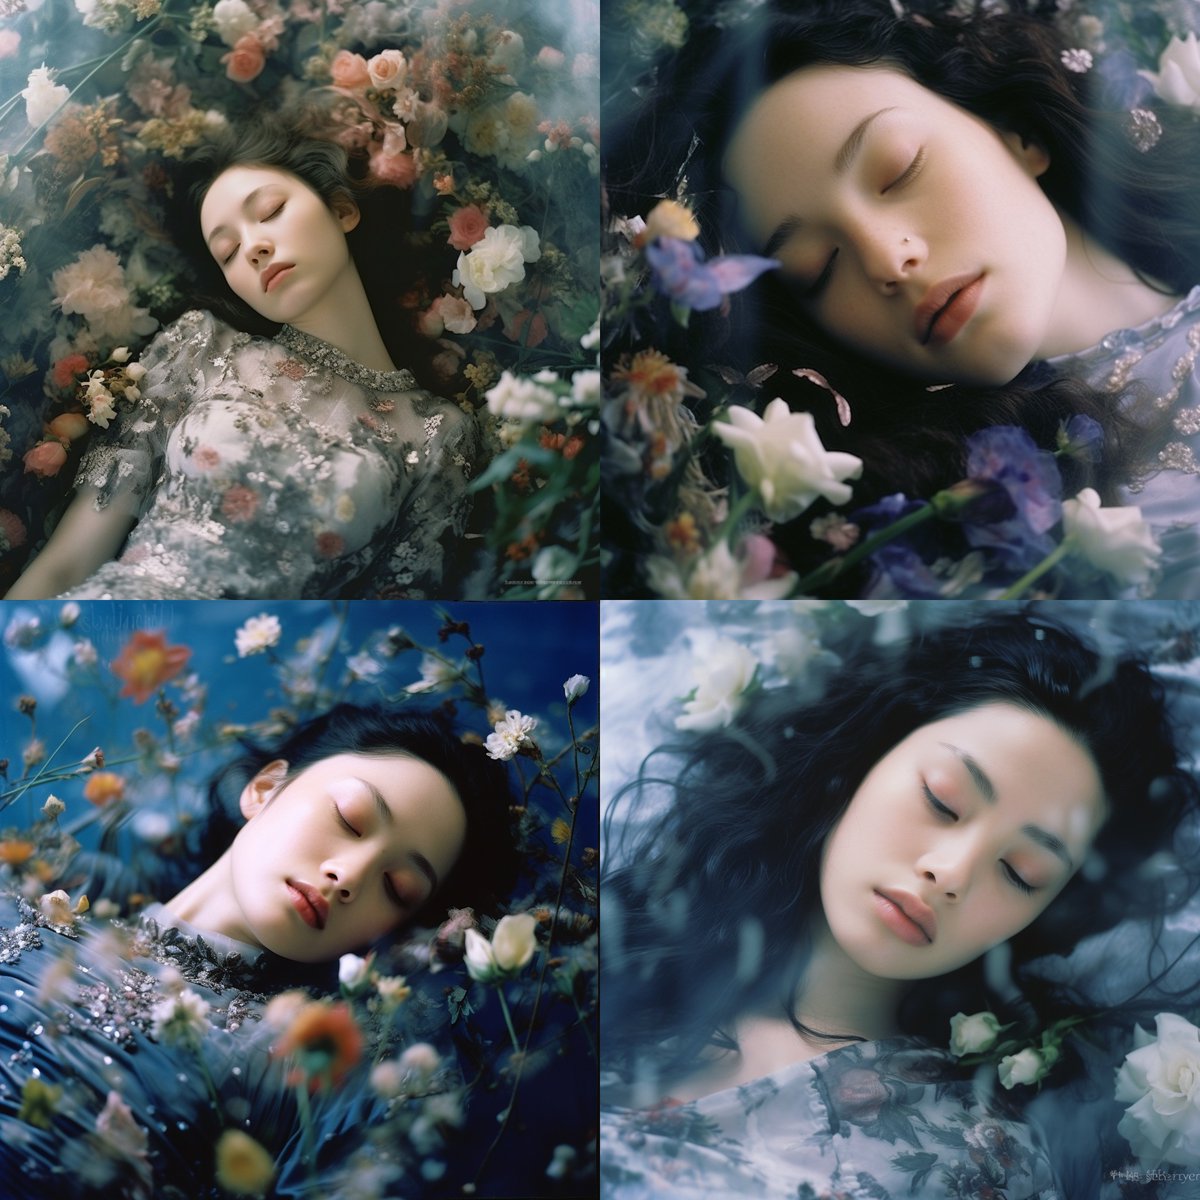 A transcendent and entropy-infused image portraying the ephemeral beauty of an AI's dreams, photographed by AutoML, captured with the Mamiya 6.